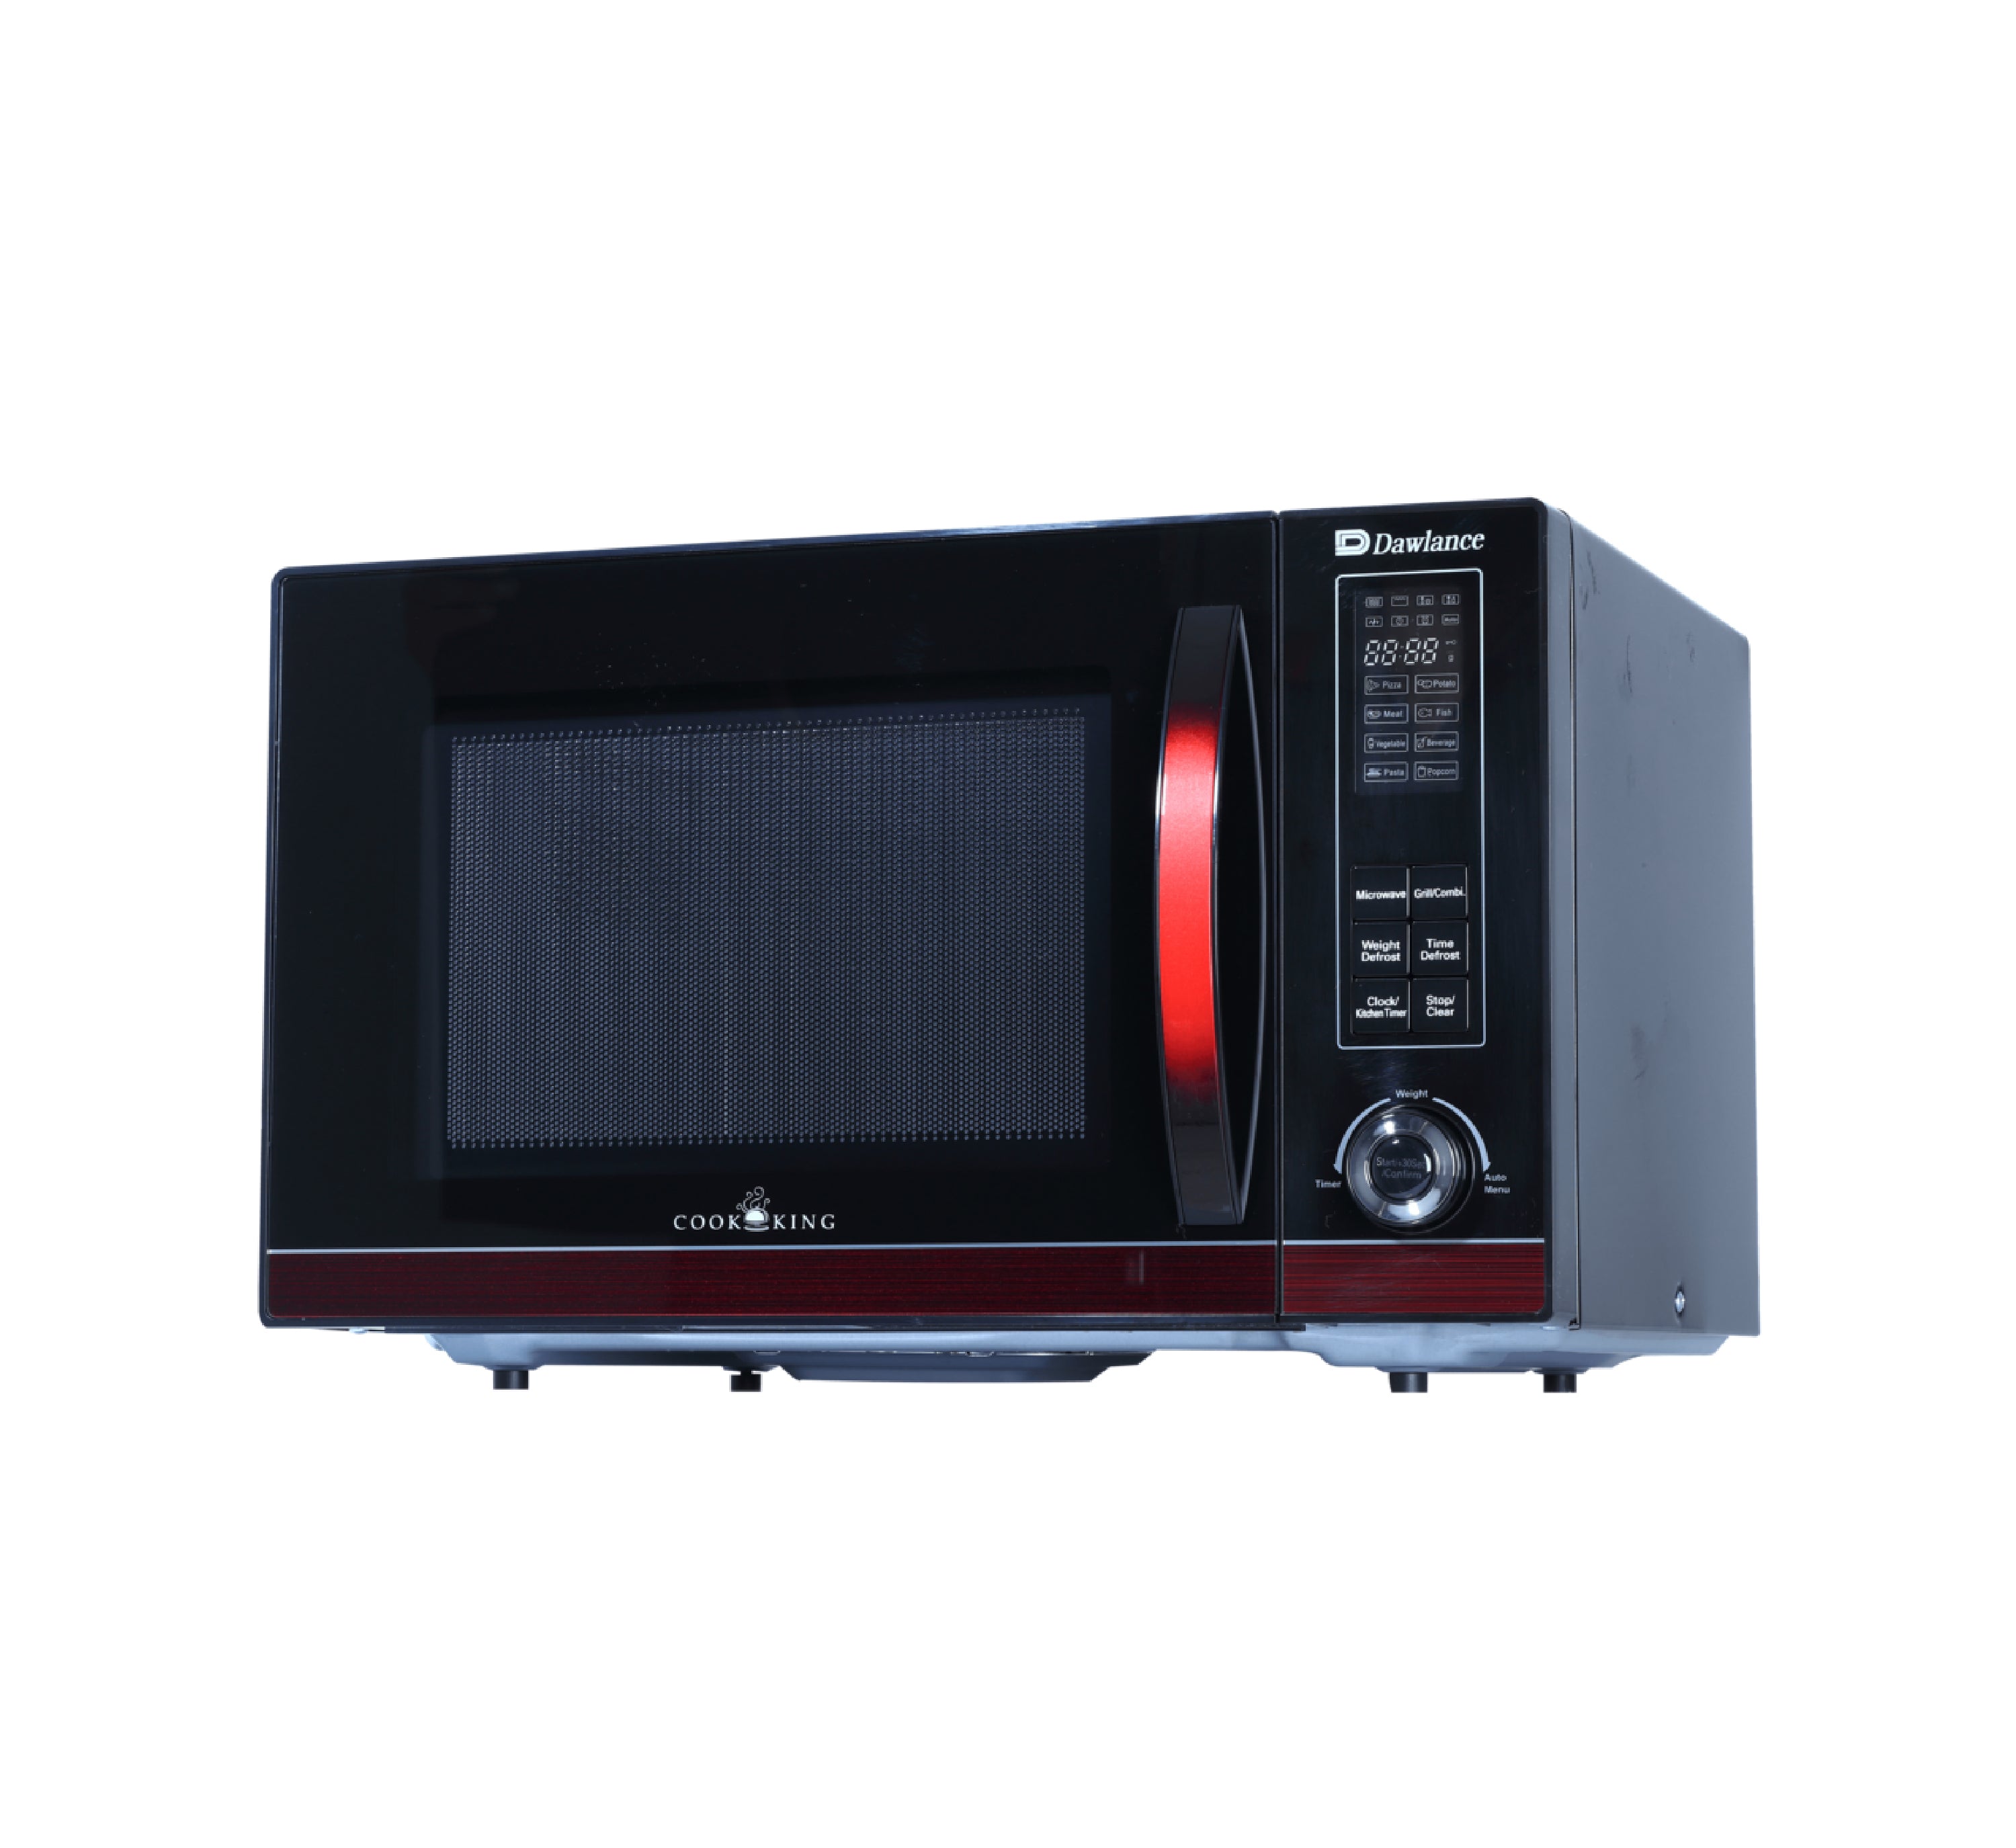 DAWLANCE DW-133 G - Grilling Microwave Oven